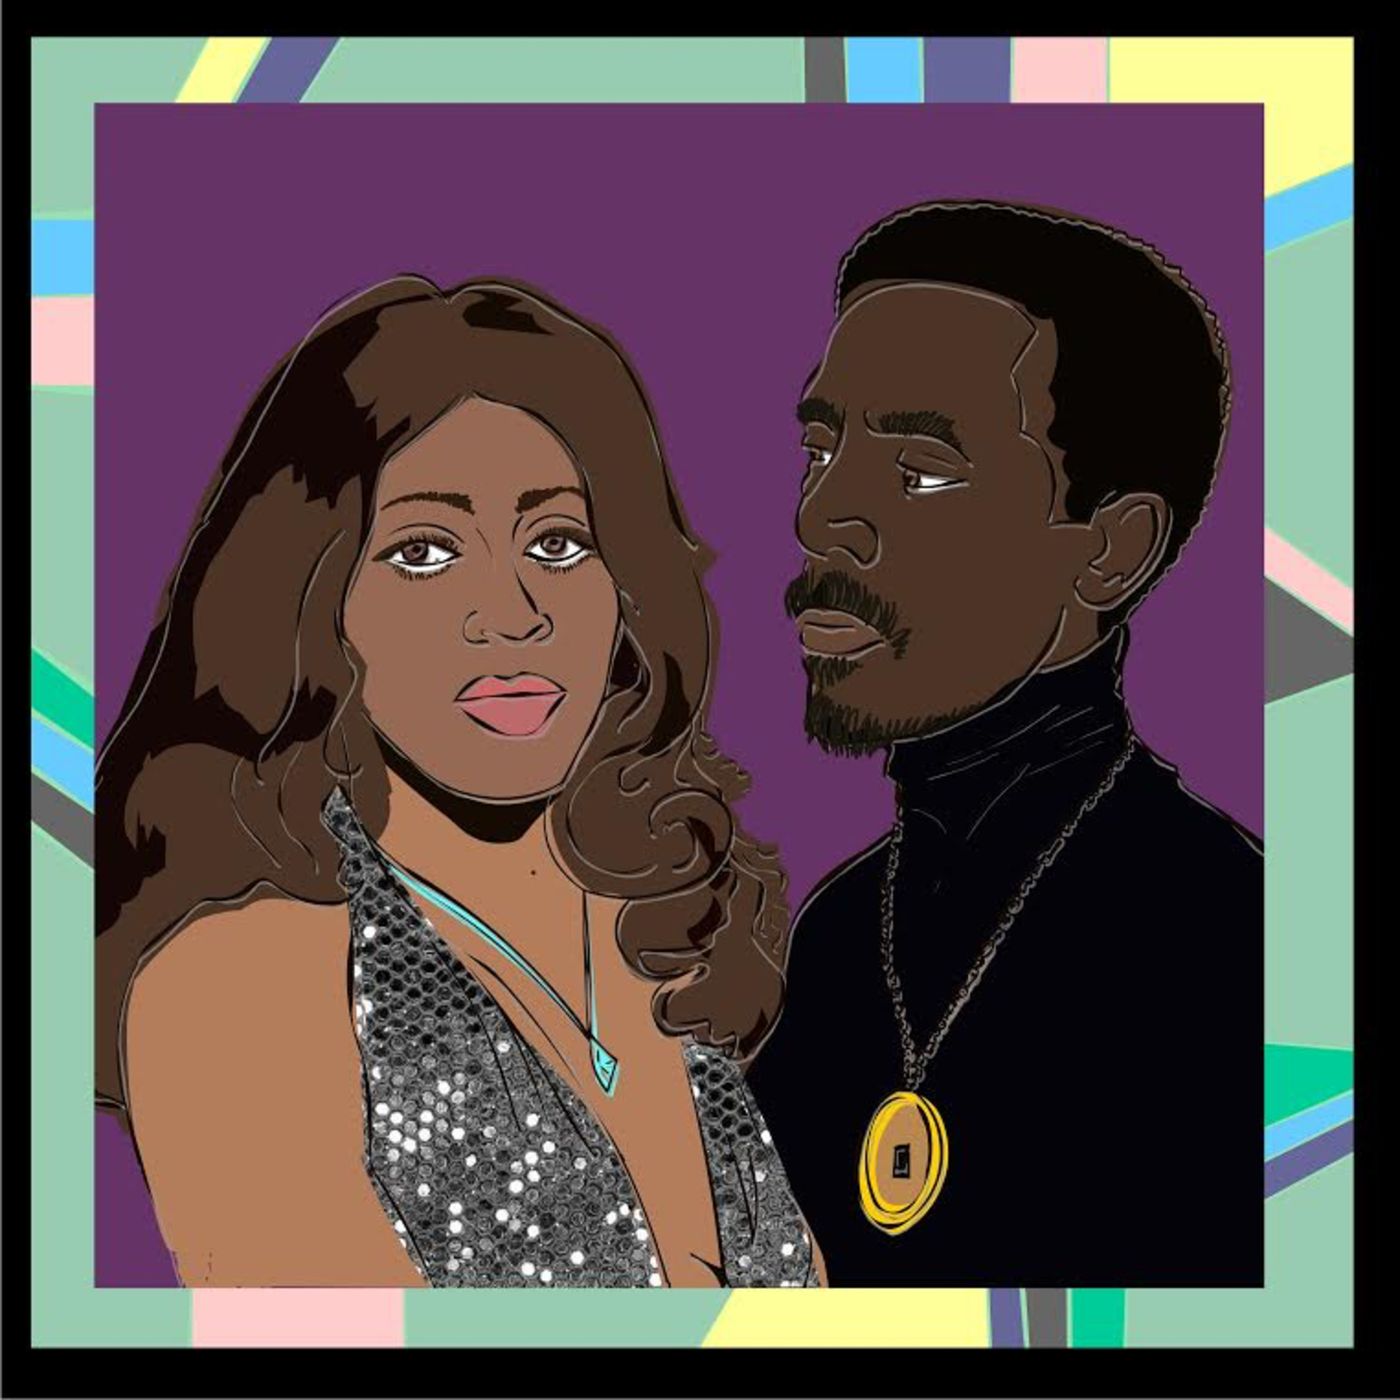 Tina & Ike Turner: A Heartbreaking Non-Love Story Pt. 2